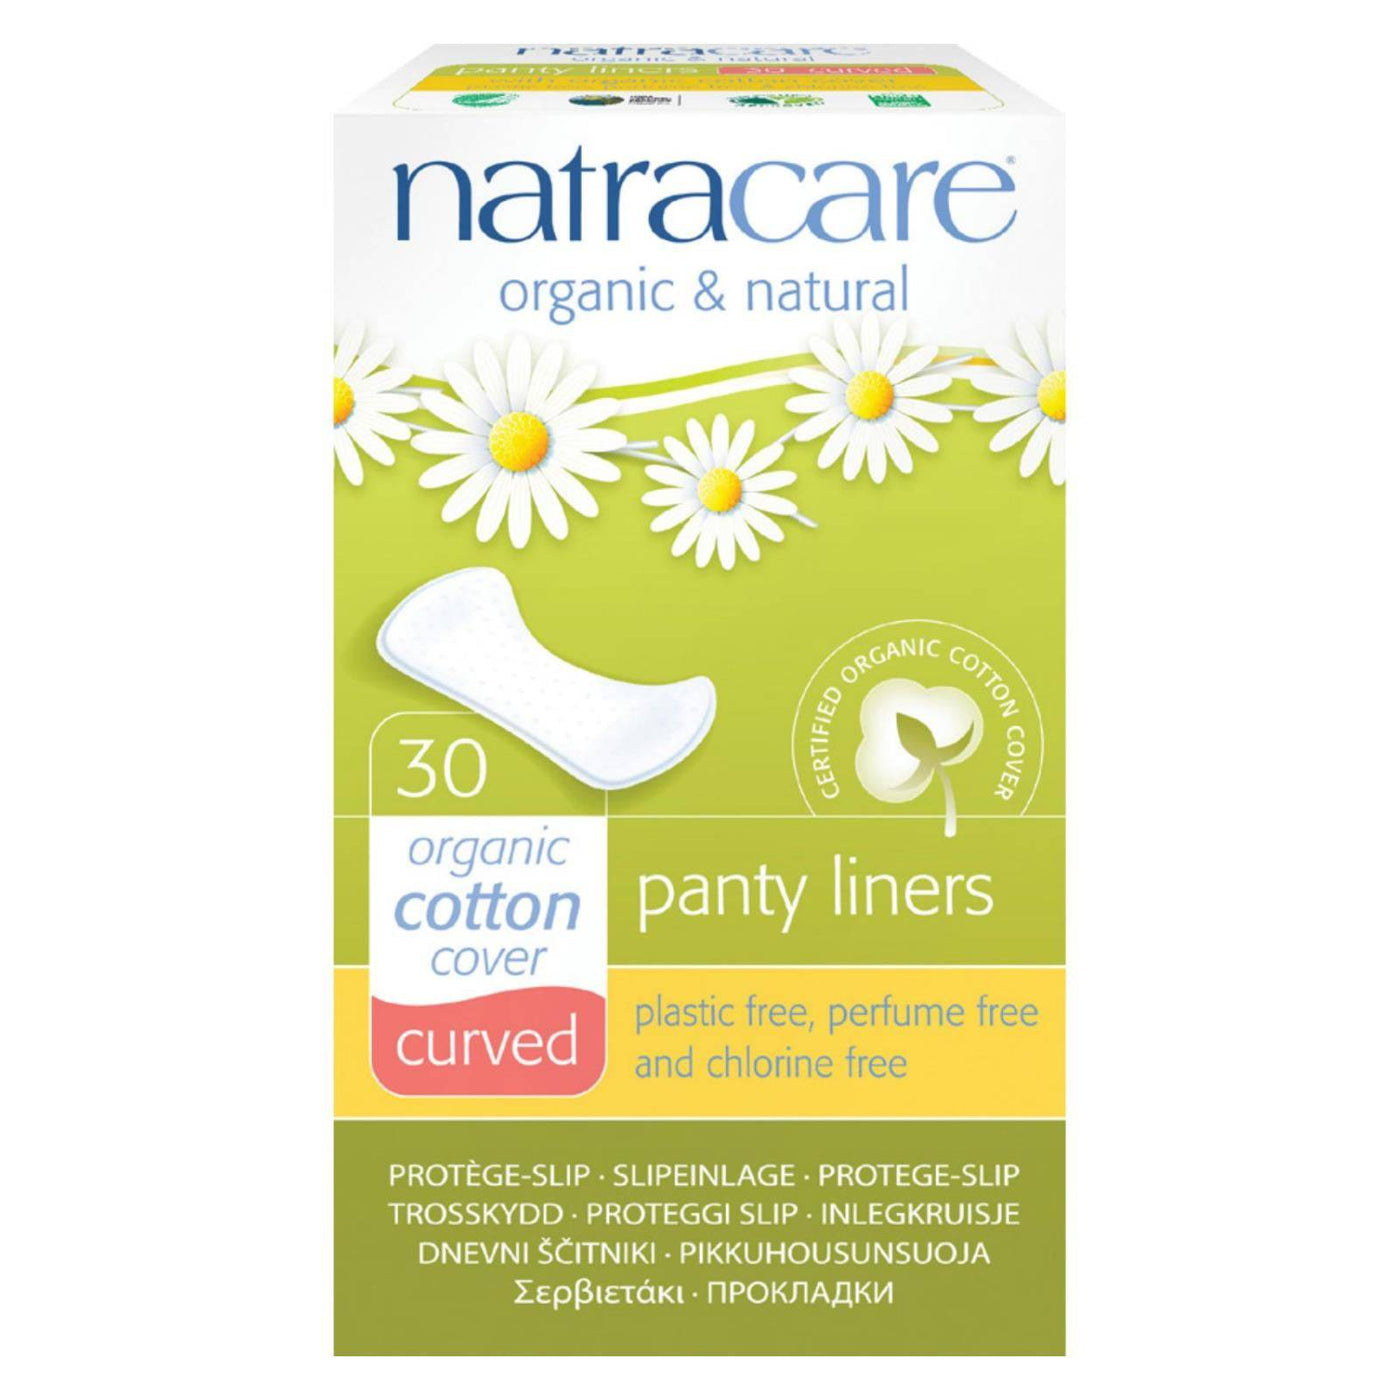 Buy Natracare Natural Curved Panty Liners - 30 Pack  at OnlyNaturals.us